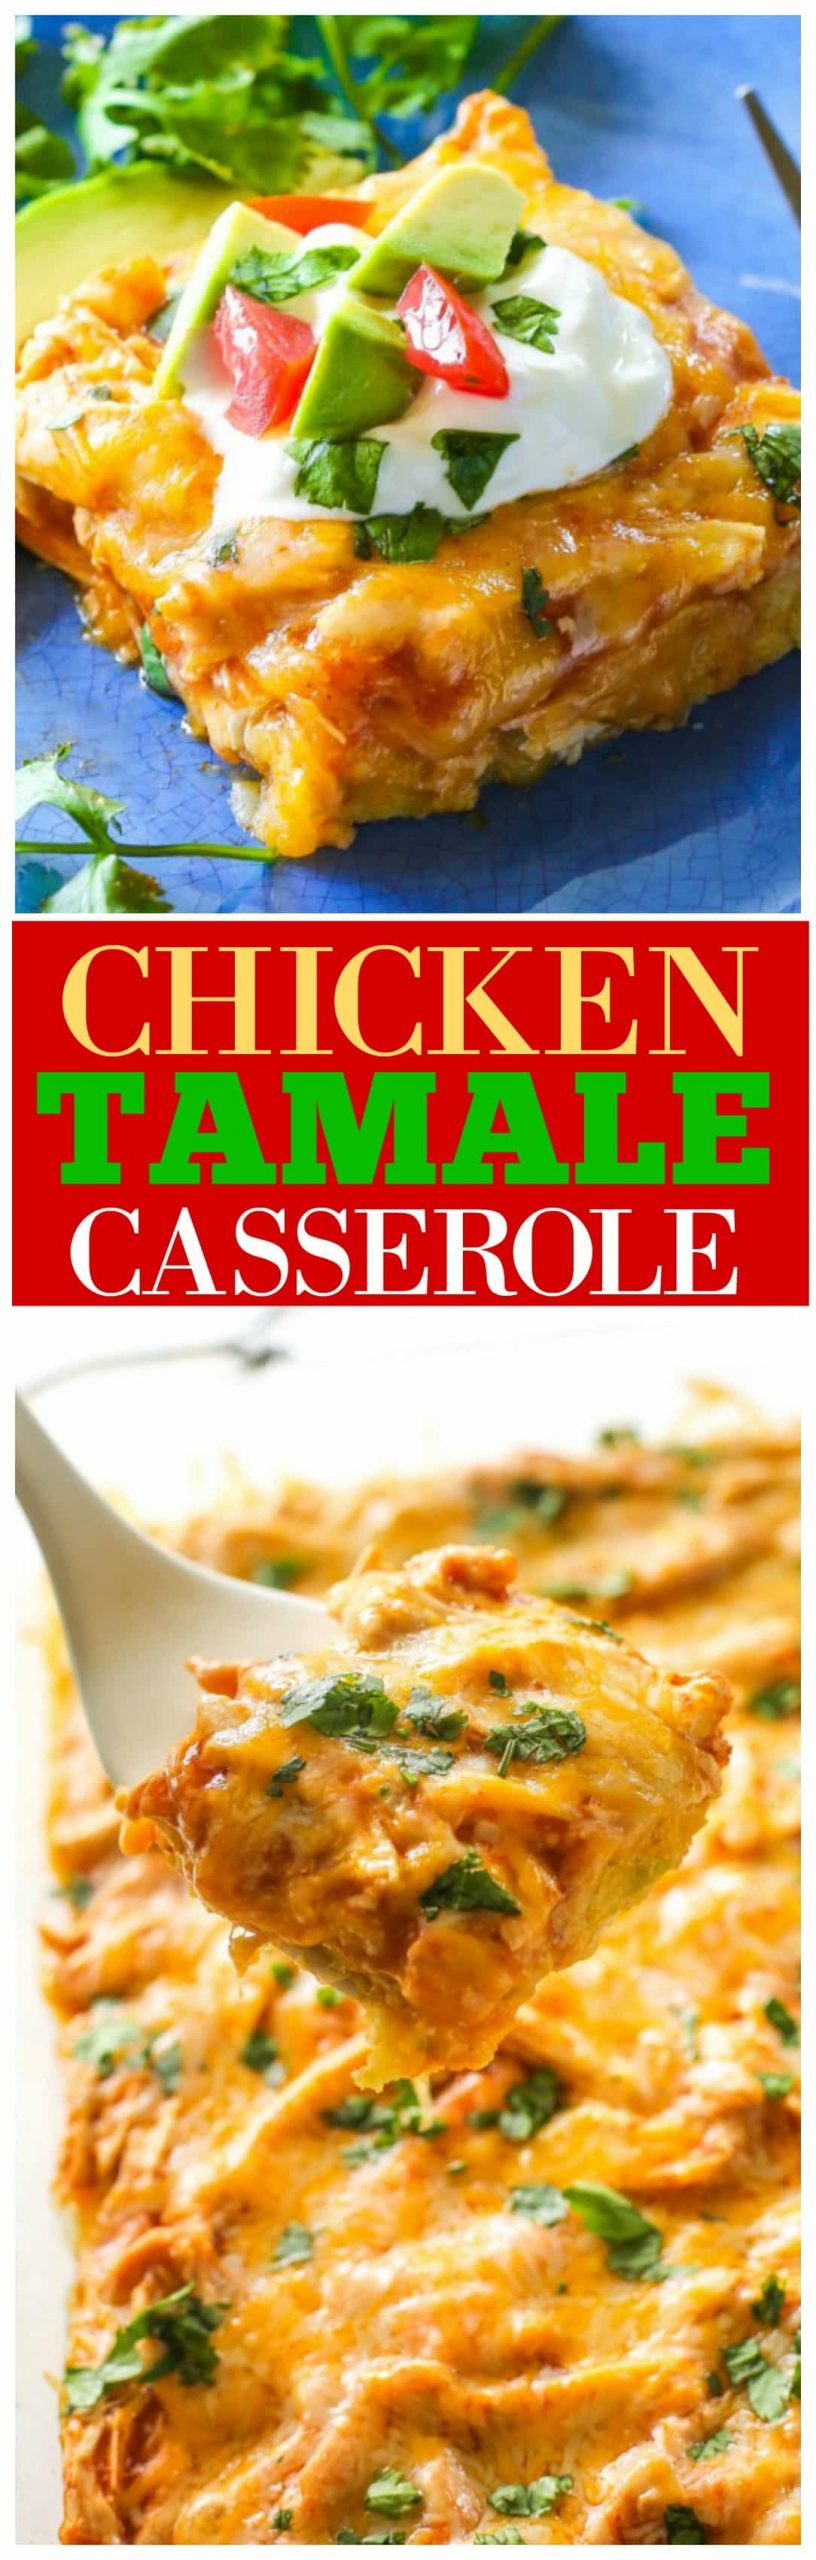 Chicken Tamale Casserole - a sweet cornbread crust topped with enchilada sauce and chicken. This is a crowd pleaser! #chicken #tamale #casserole #recipe #dinner